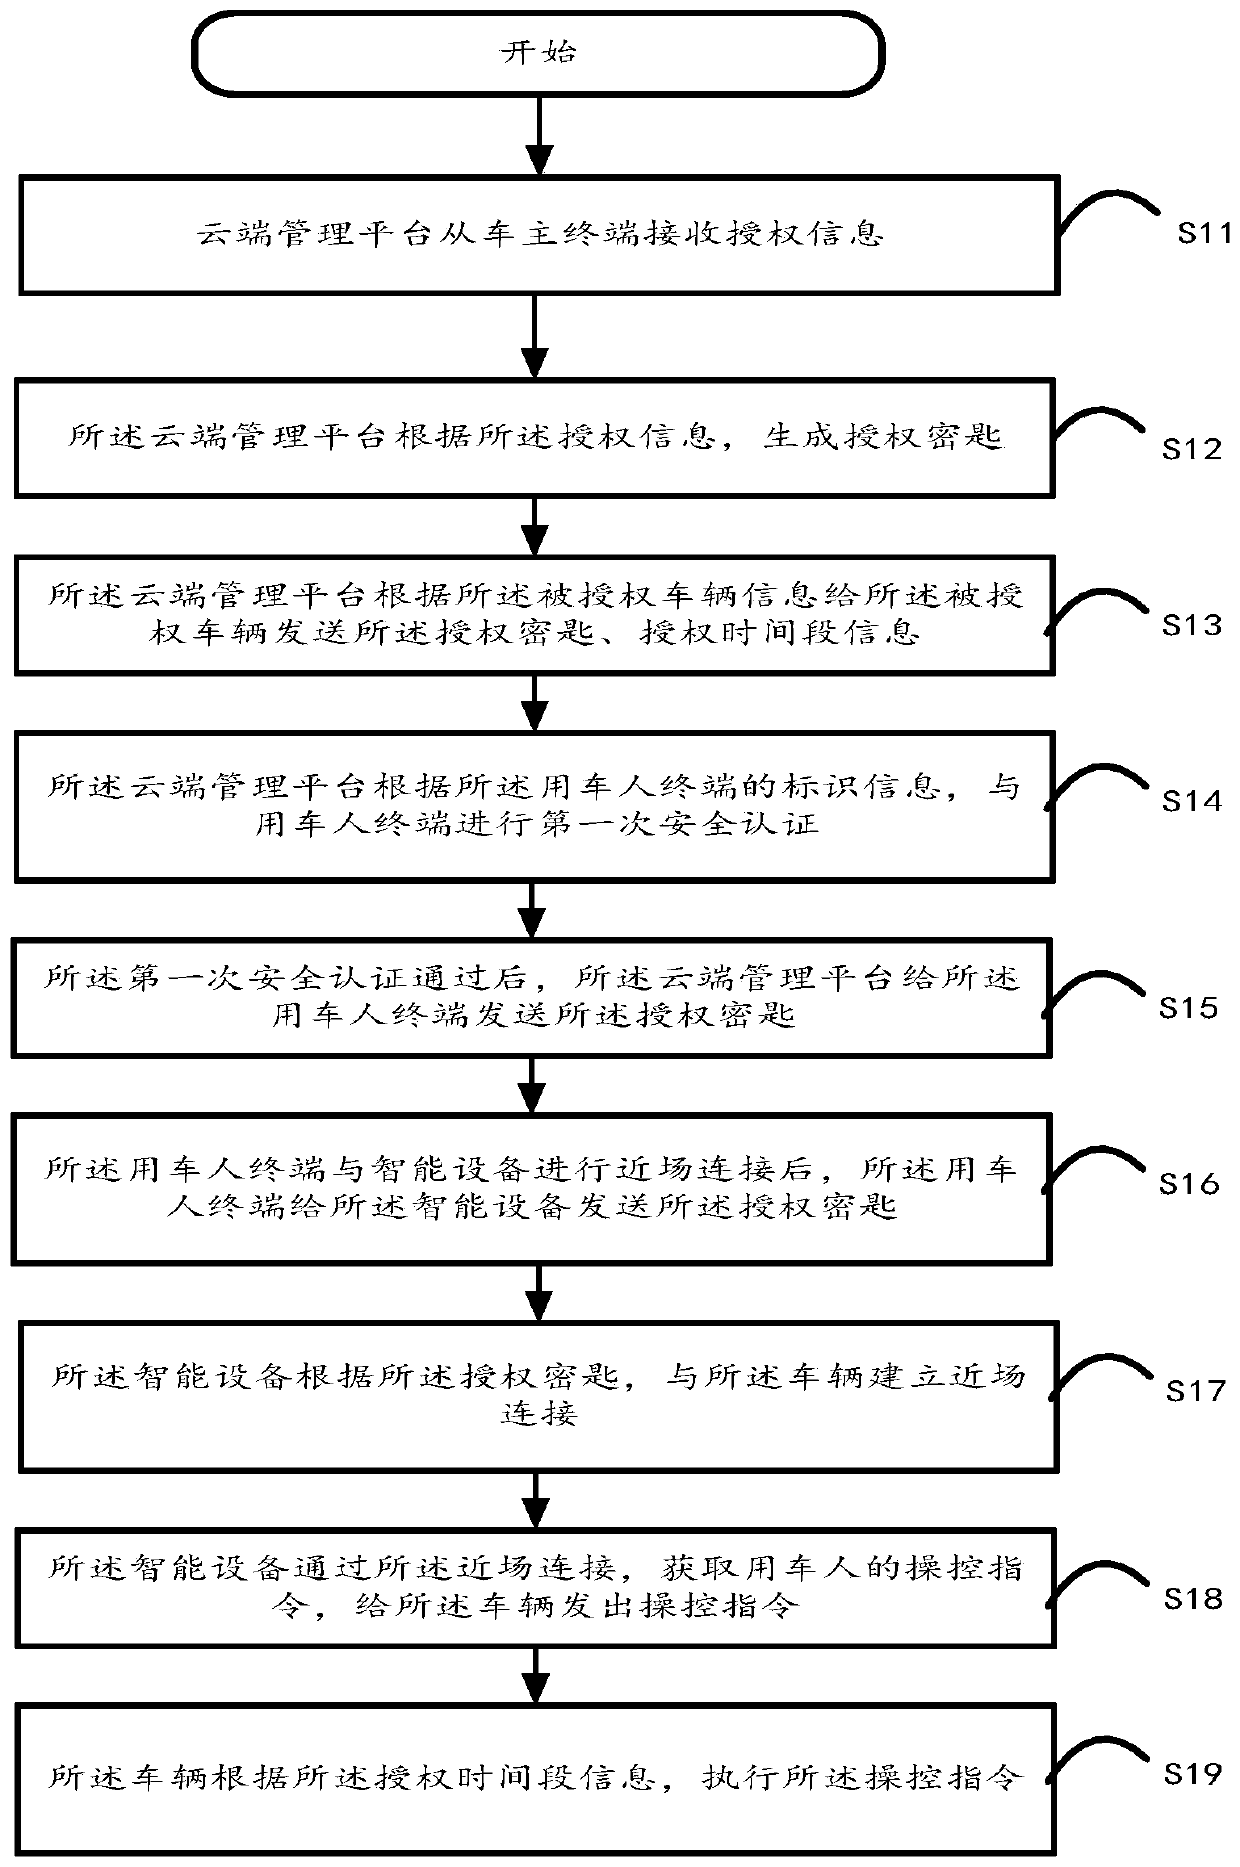 Shared vehicle control method and system